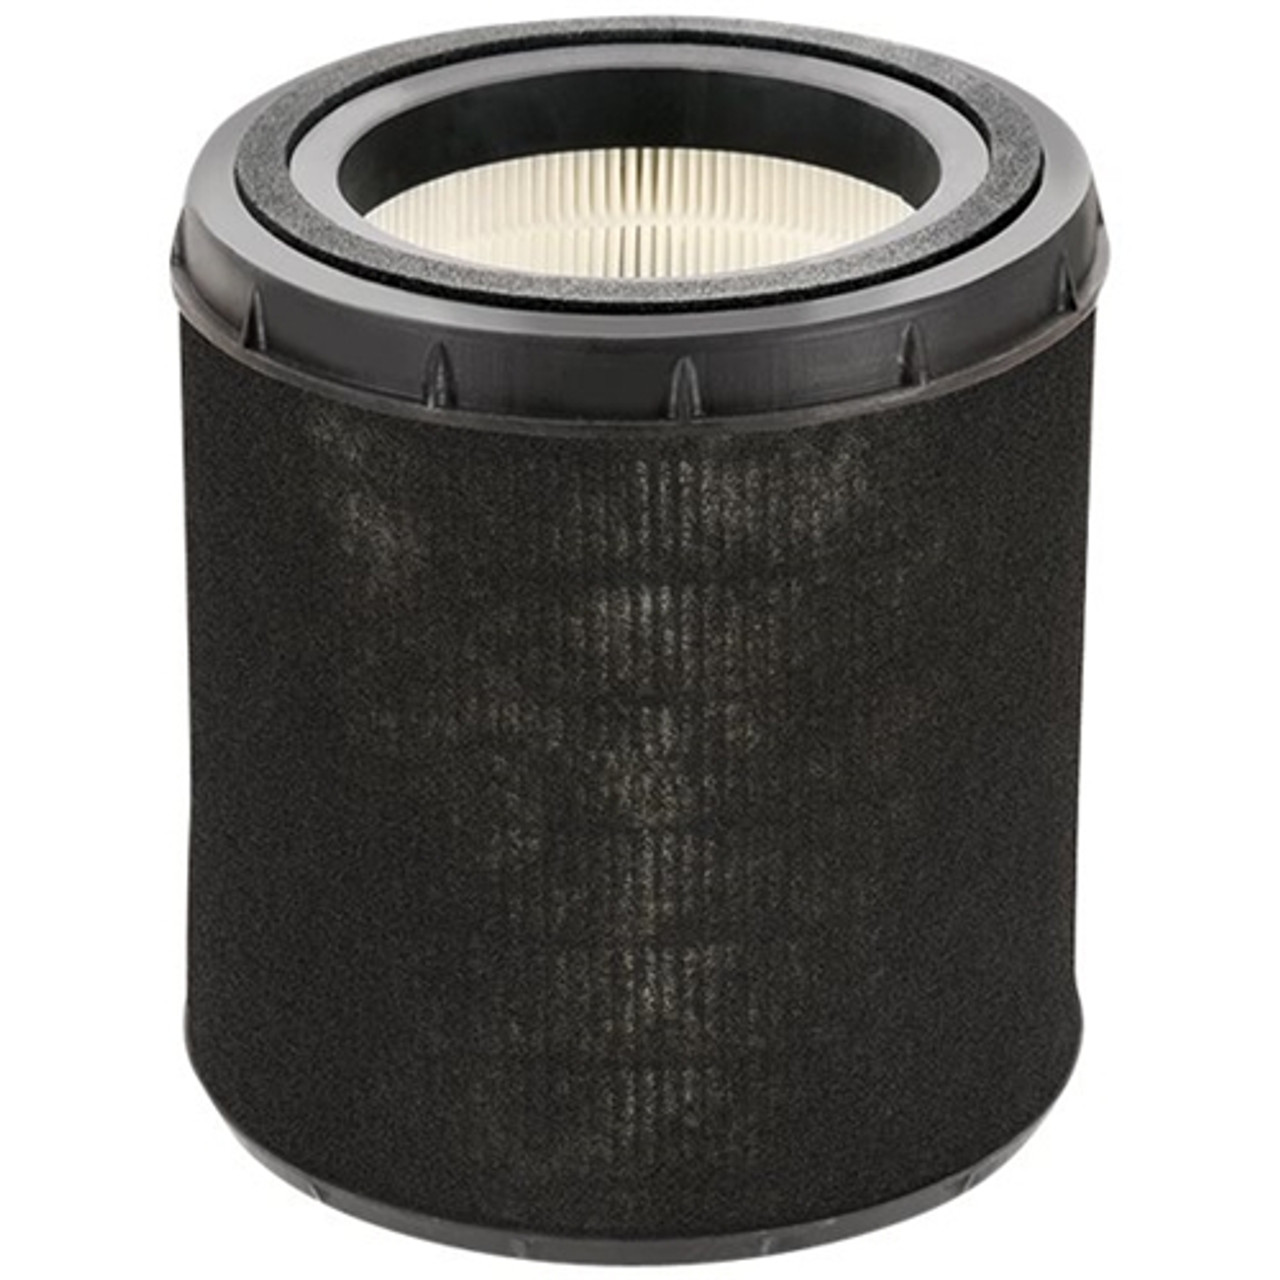 GermGuardian - Charcoal and HEPA Filter for GermGuardian AC4700BDLX and AC4700DLX - Black/White